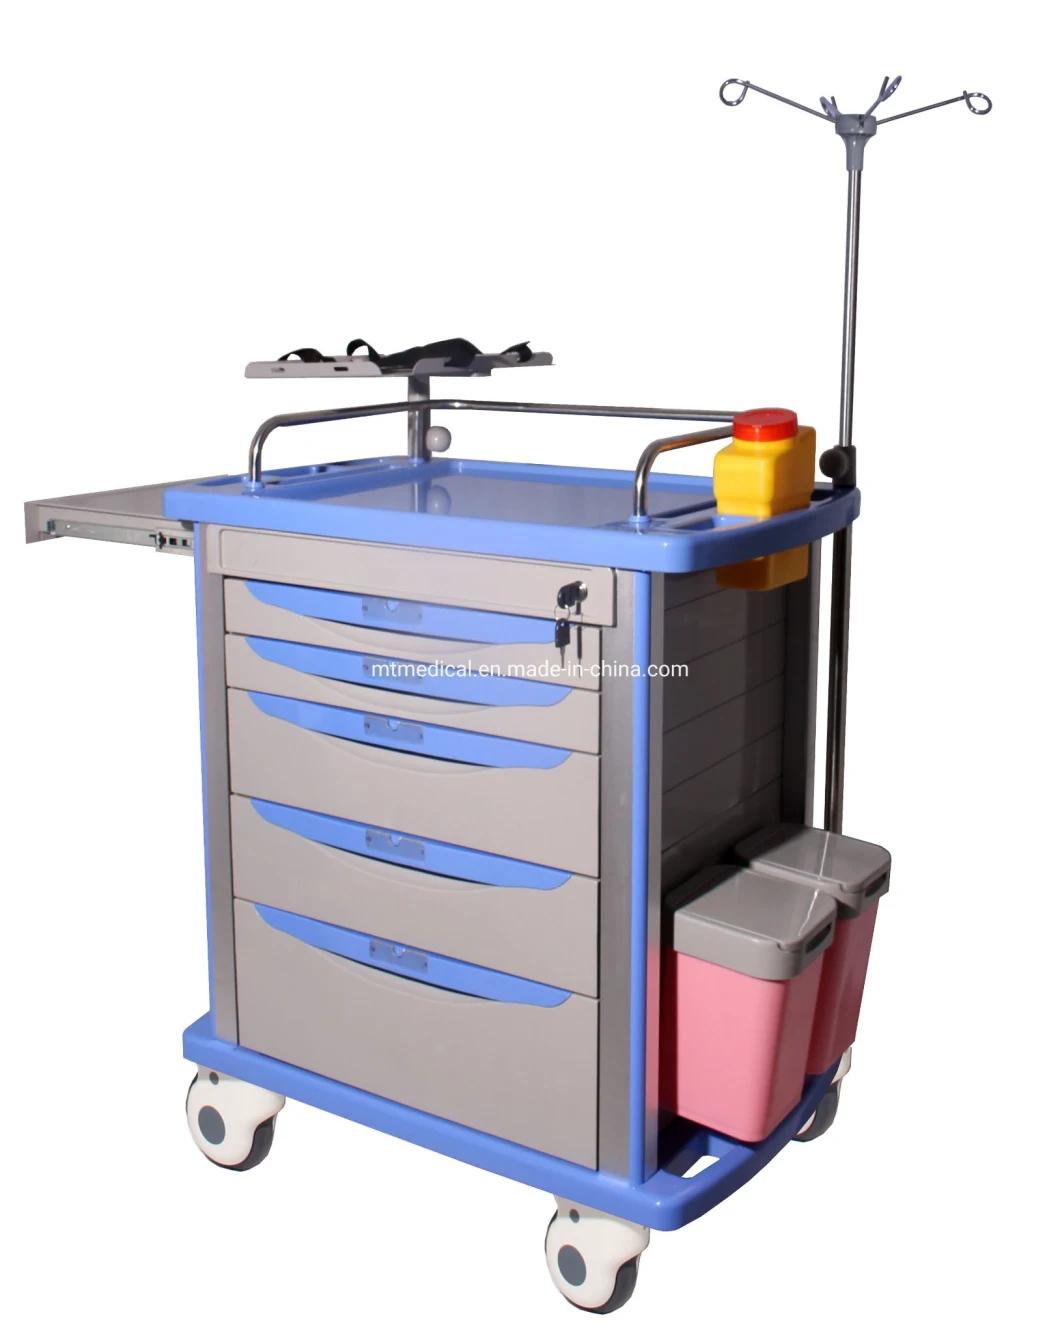 China Manufacturer High Performance Anesthesia Trolley ABS Material